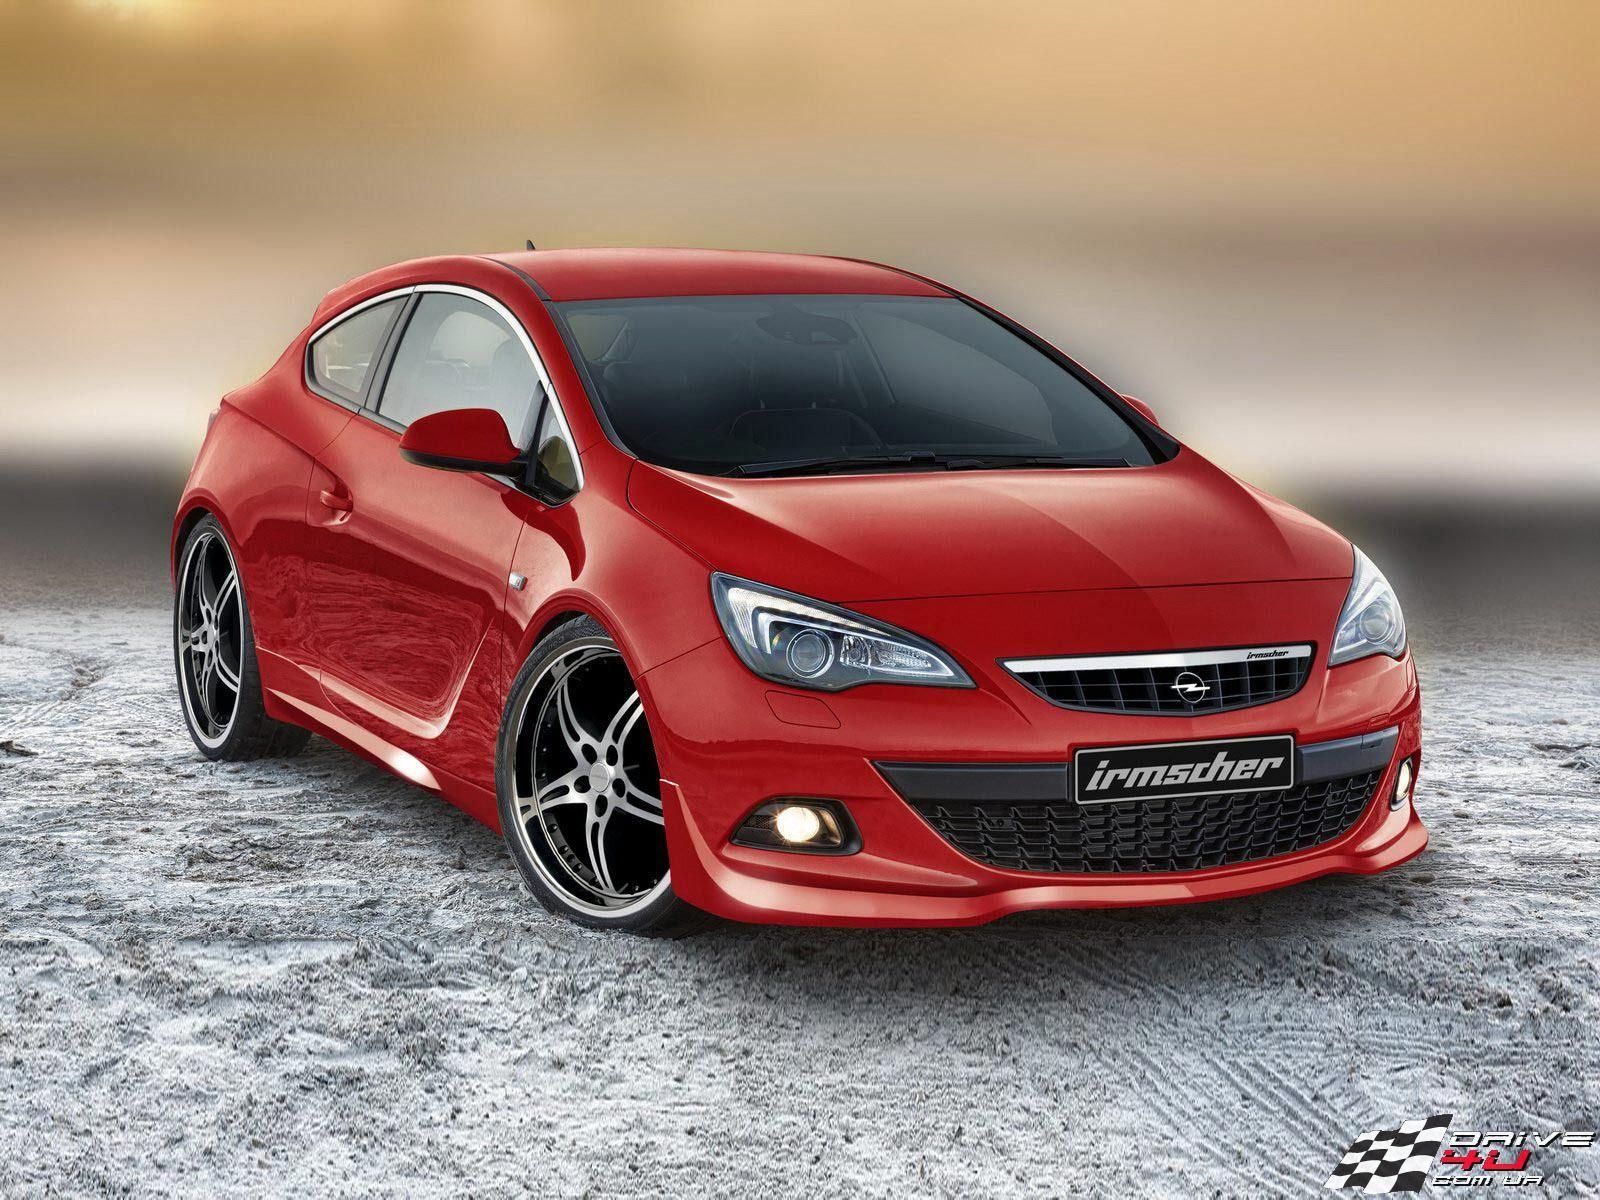 New car Opel Astra GTC 2014 wallpaper and image